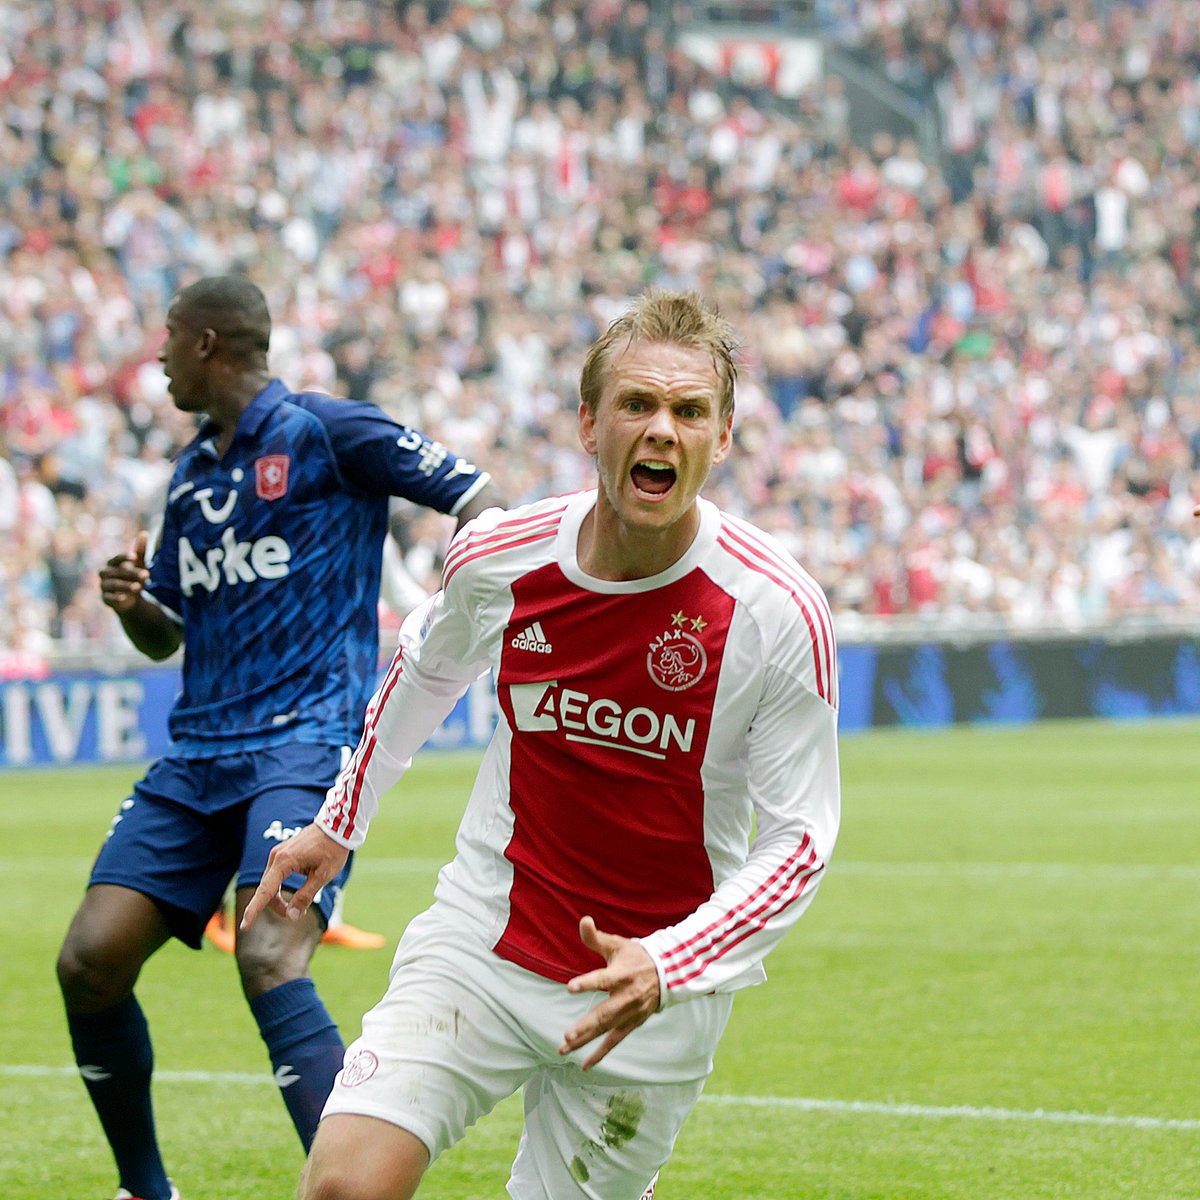 test Twitter Media - From ⭐️⭐️ to ⭐️⭐️⭐️

Happy birthday to you, @siemdejong! https://t.co/clUeUOZKfg